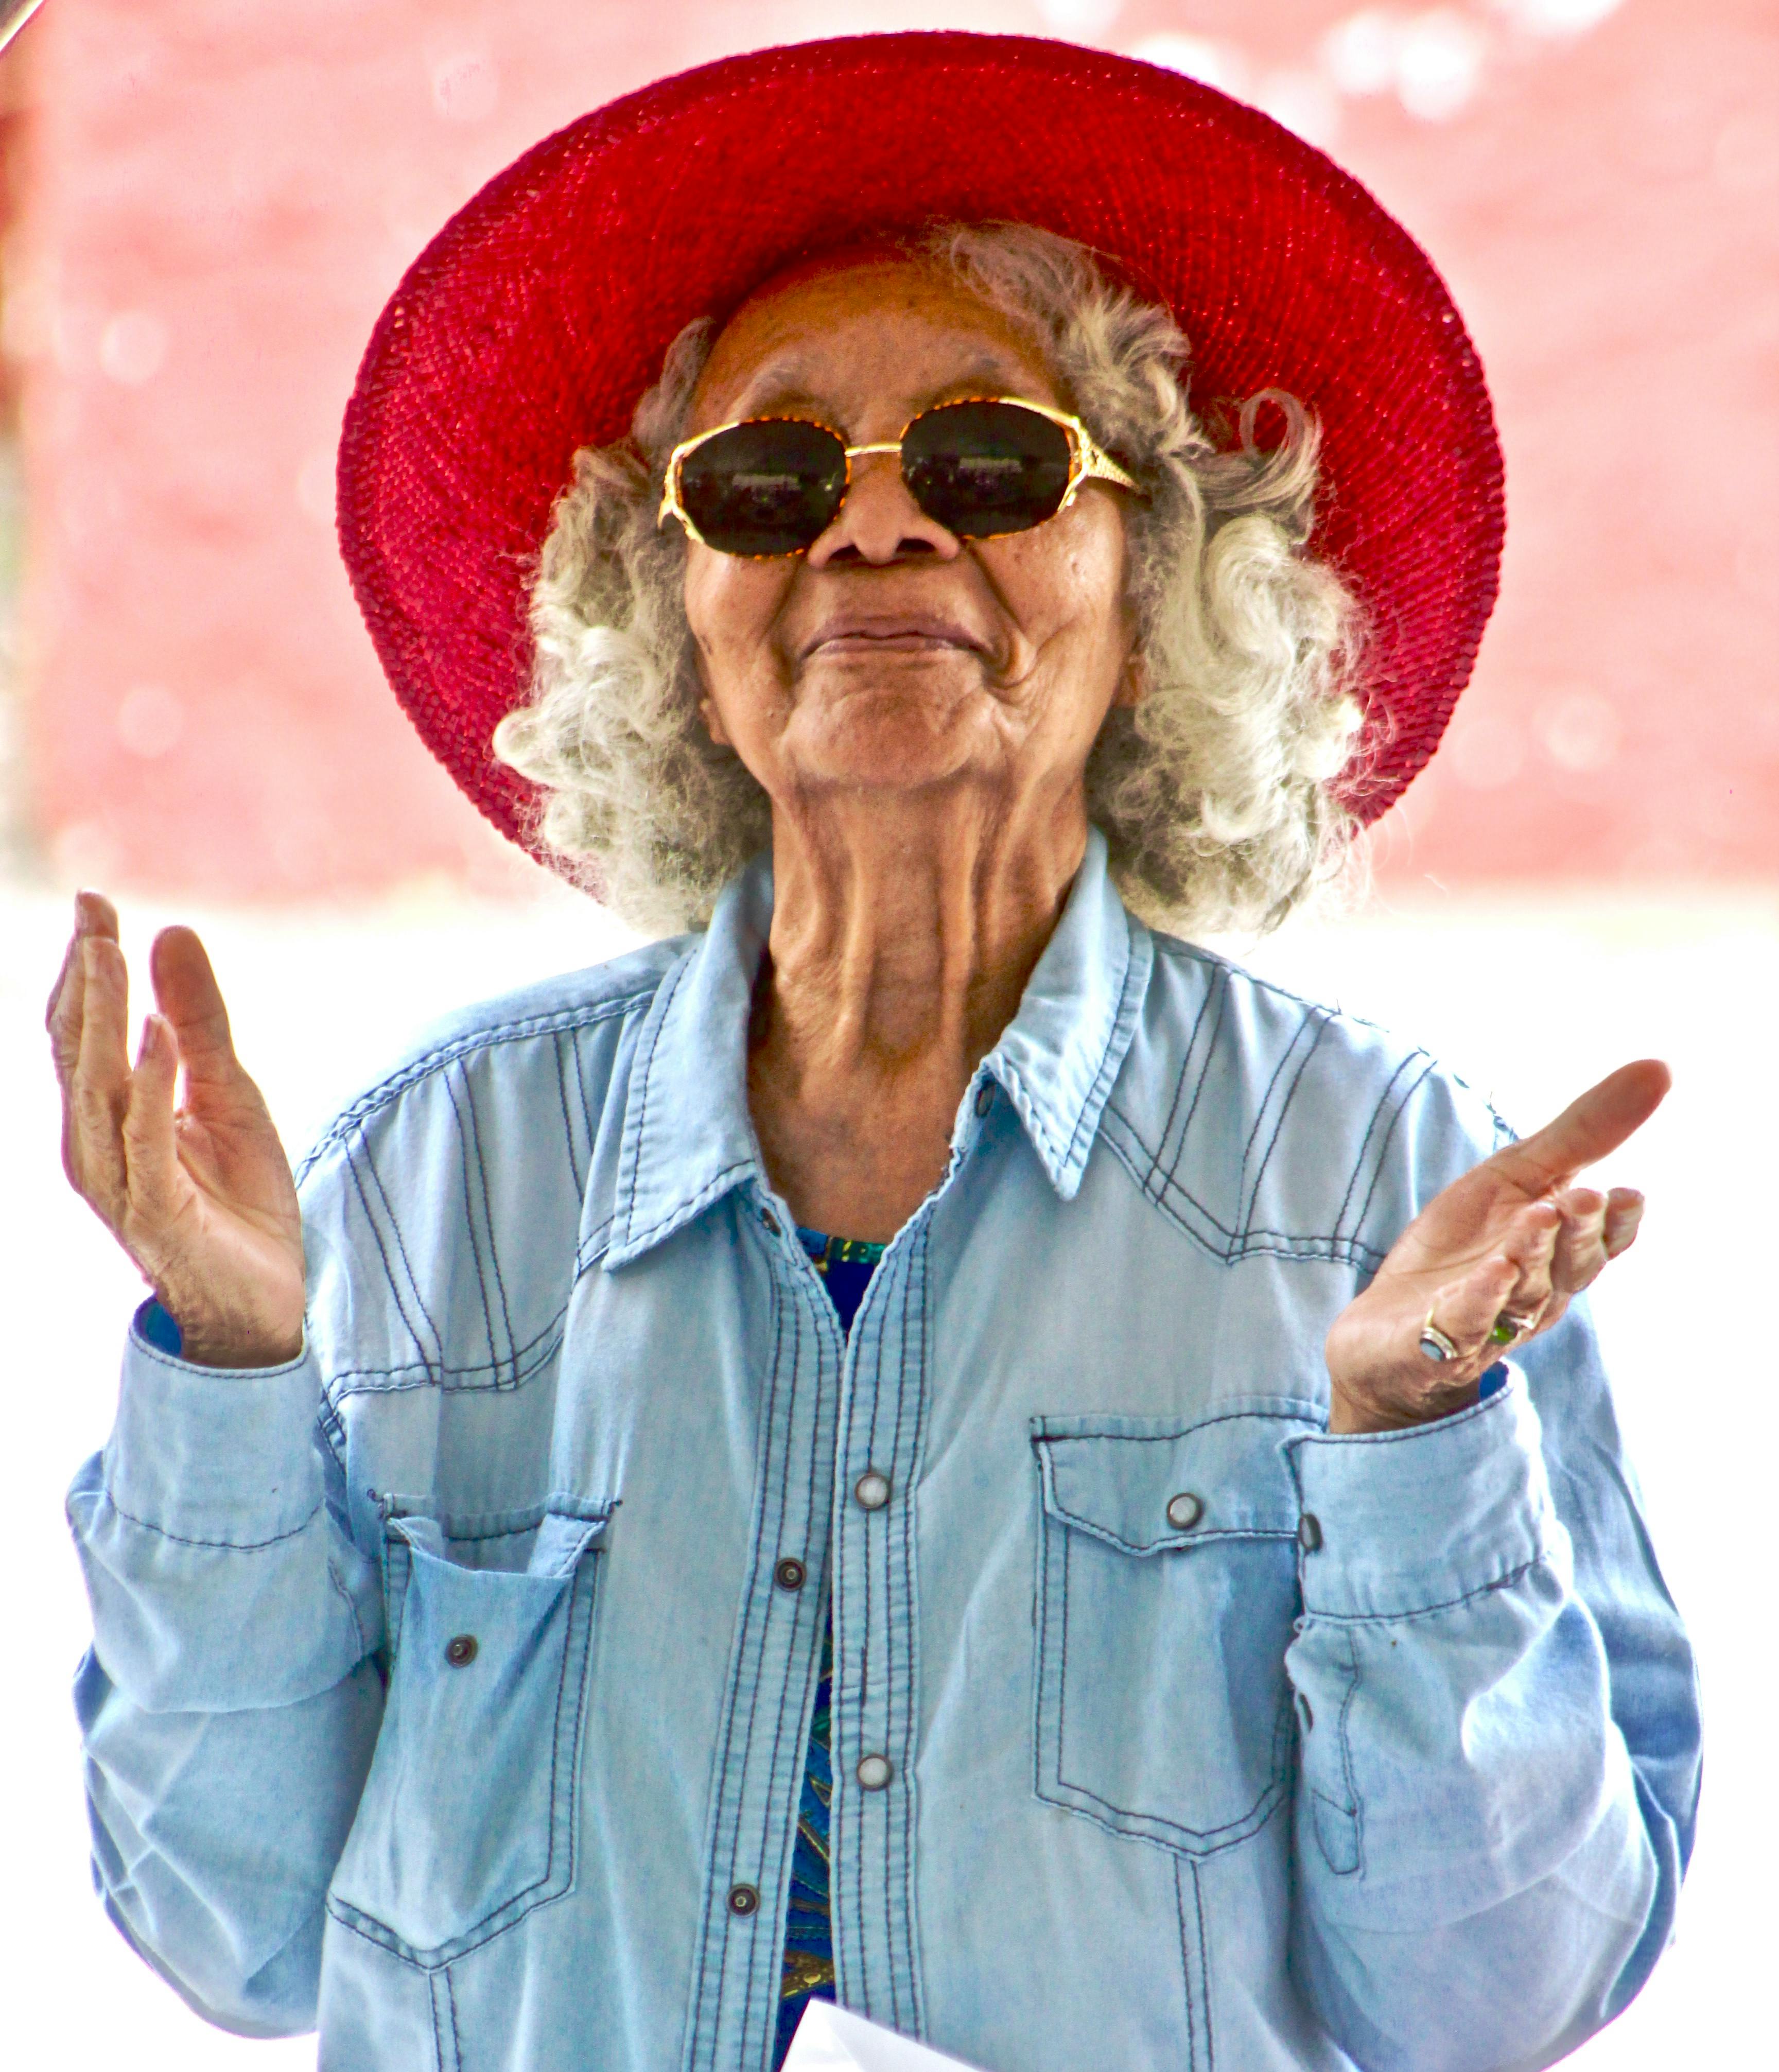 An old woman wearing hat and sunglasses | Photo: Pexels